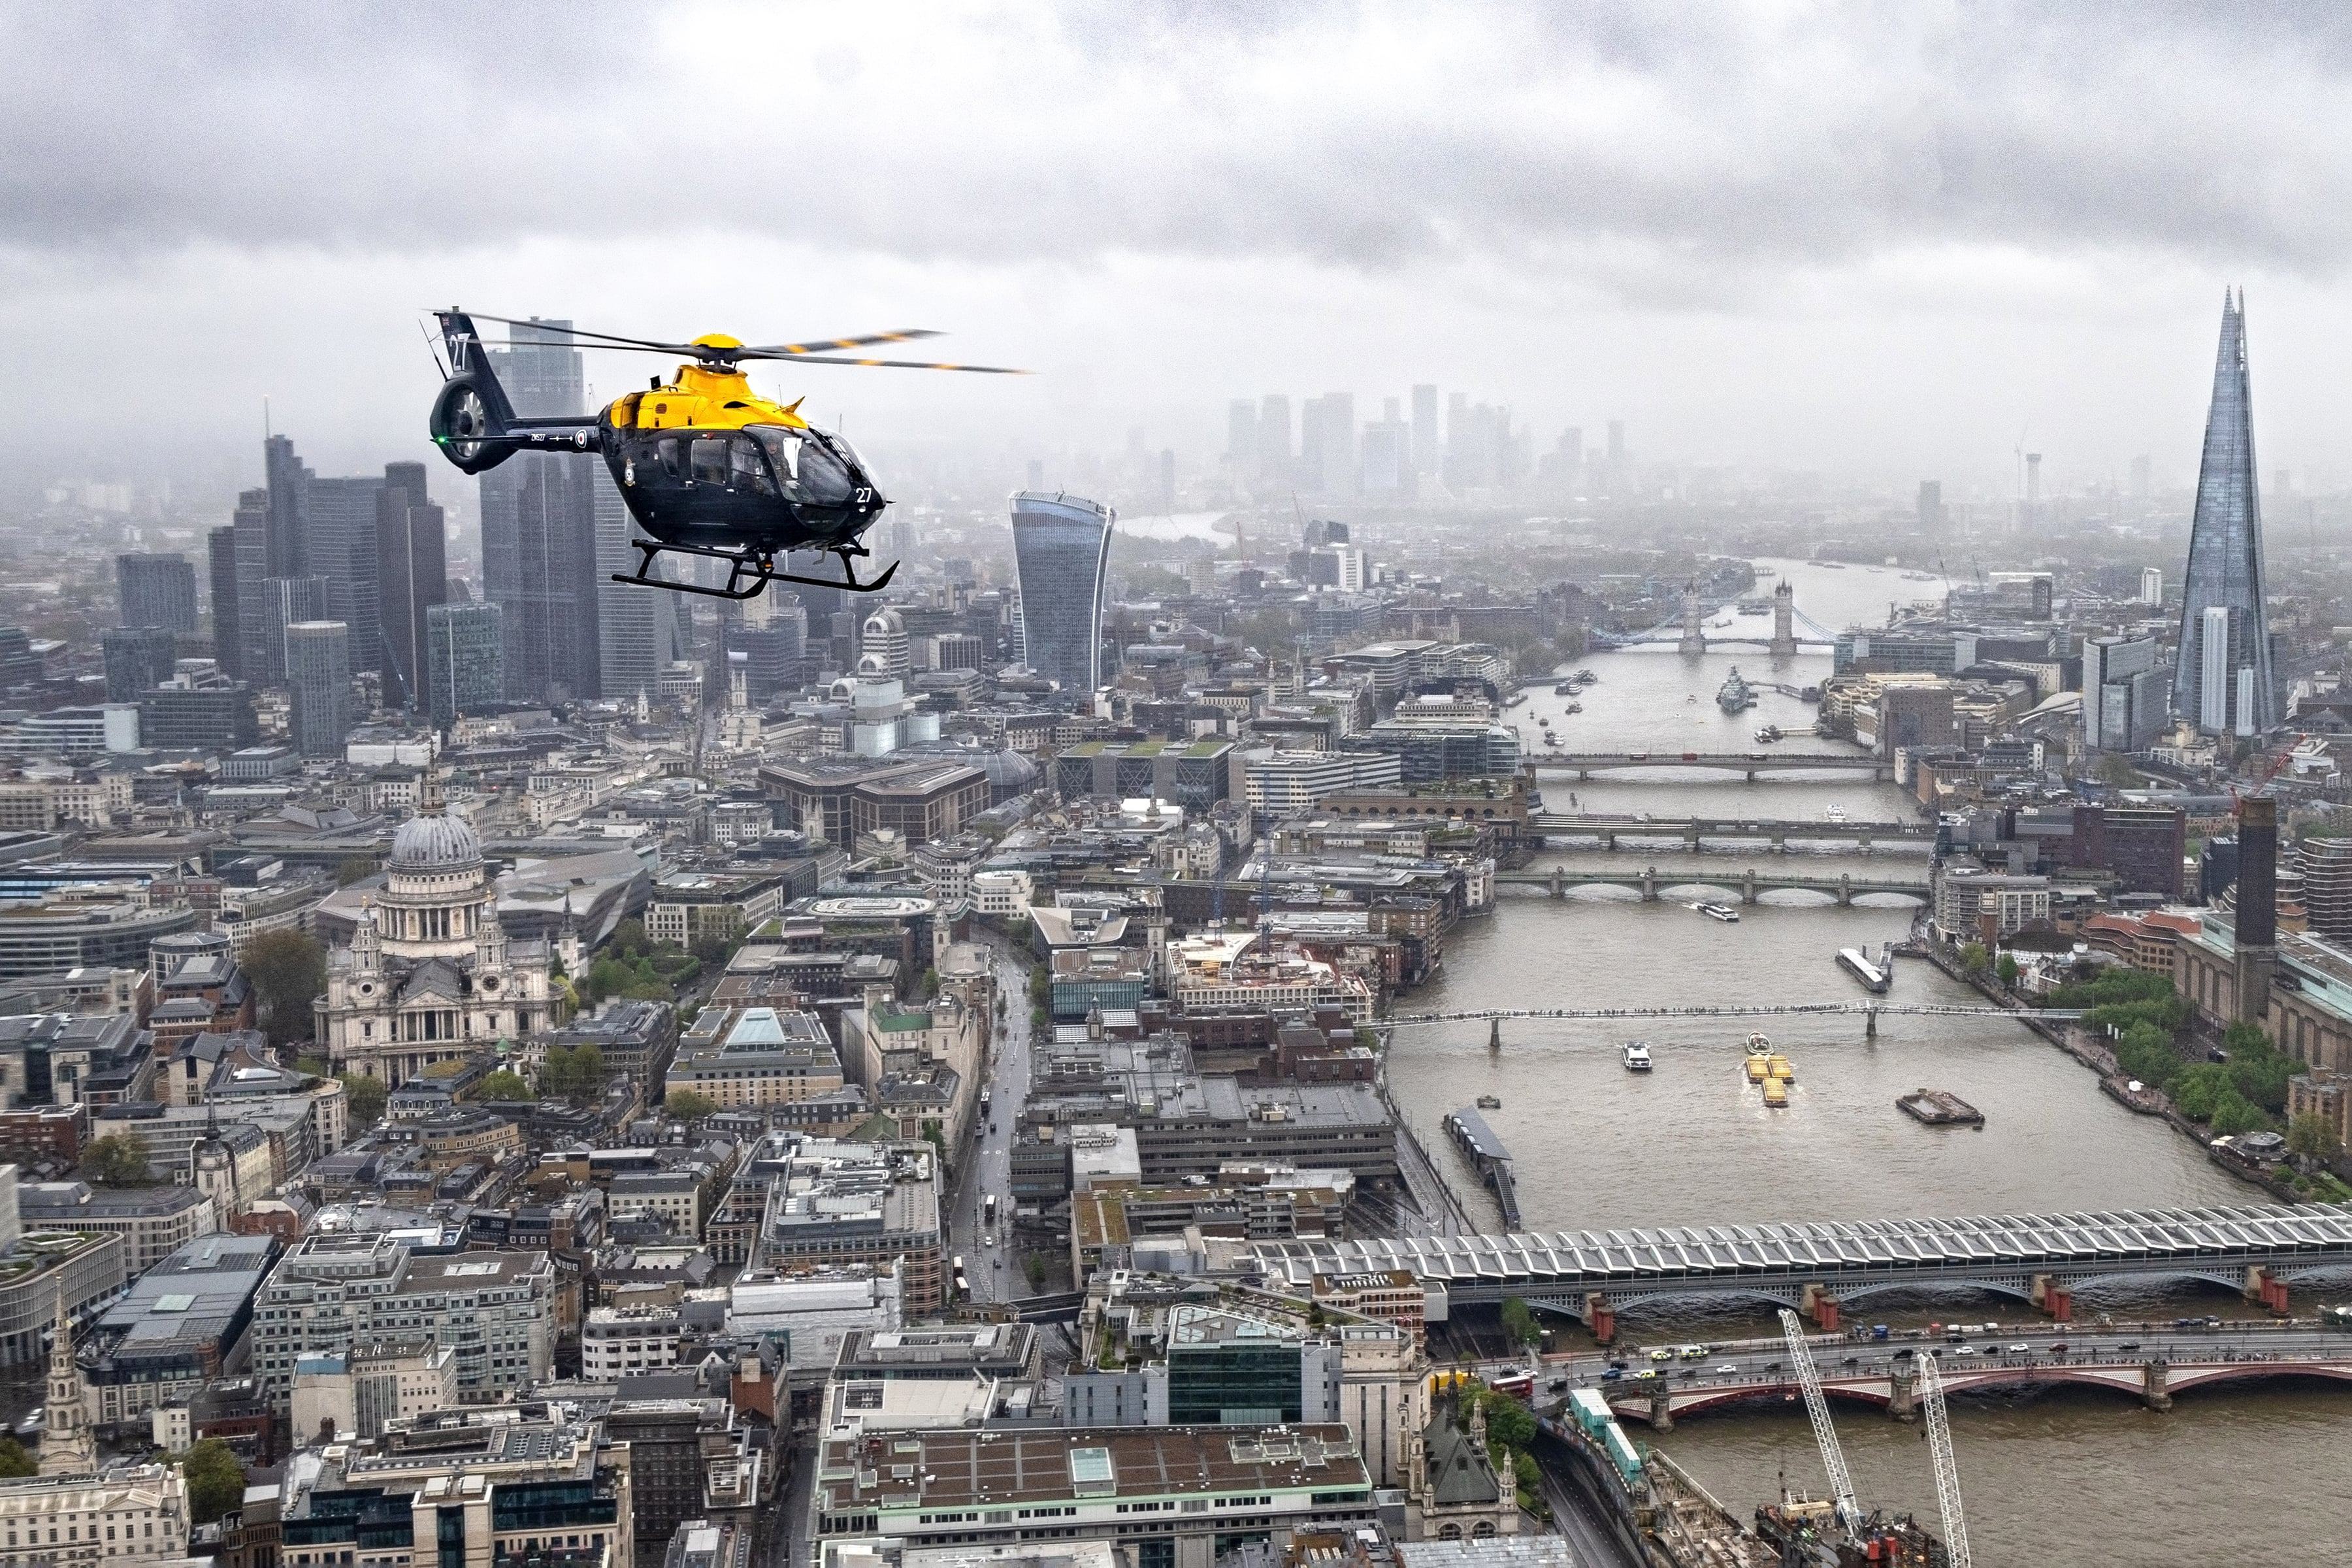 RAF Juno helicopter flying over iconic London landscape